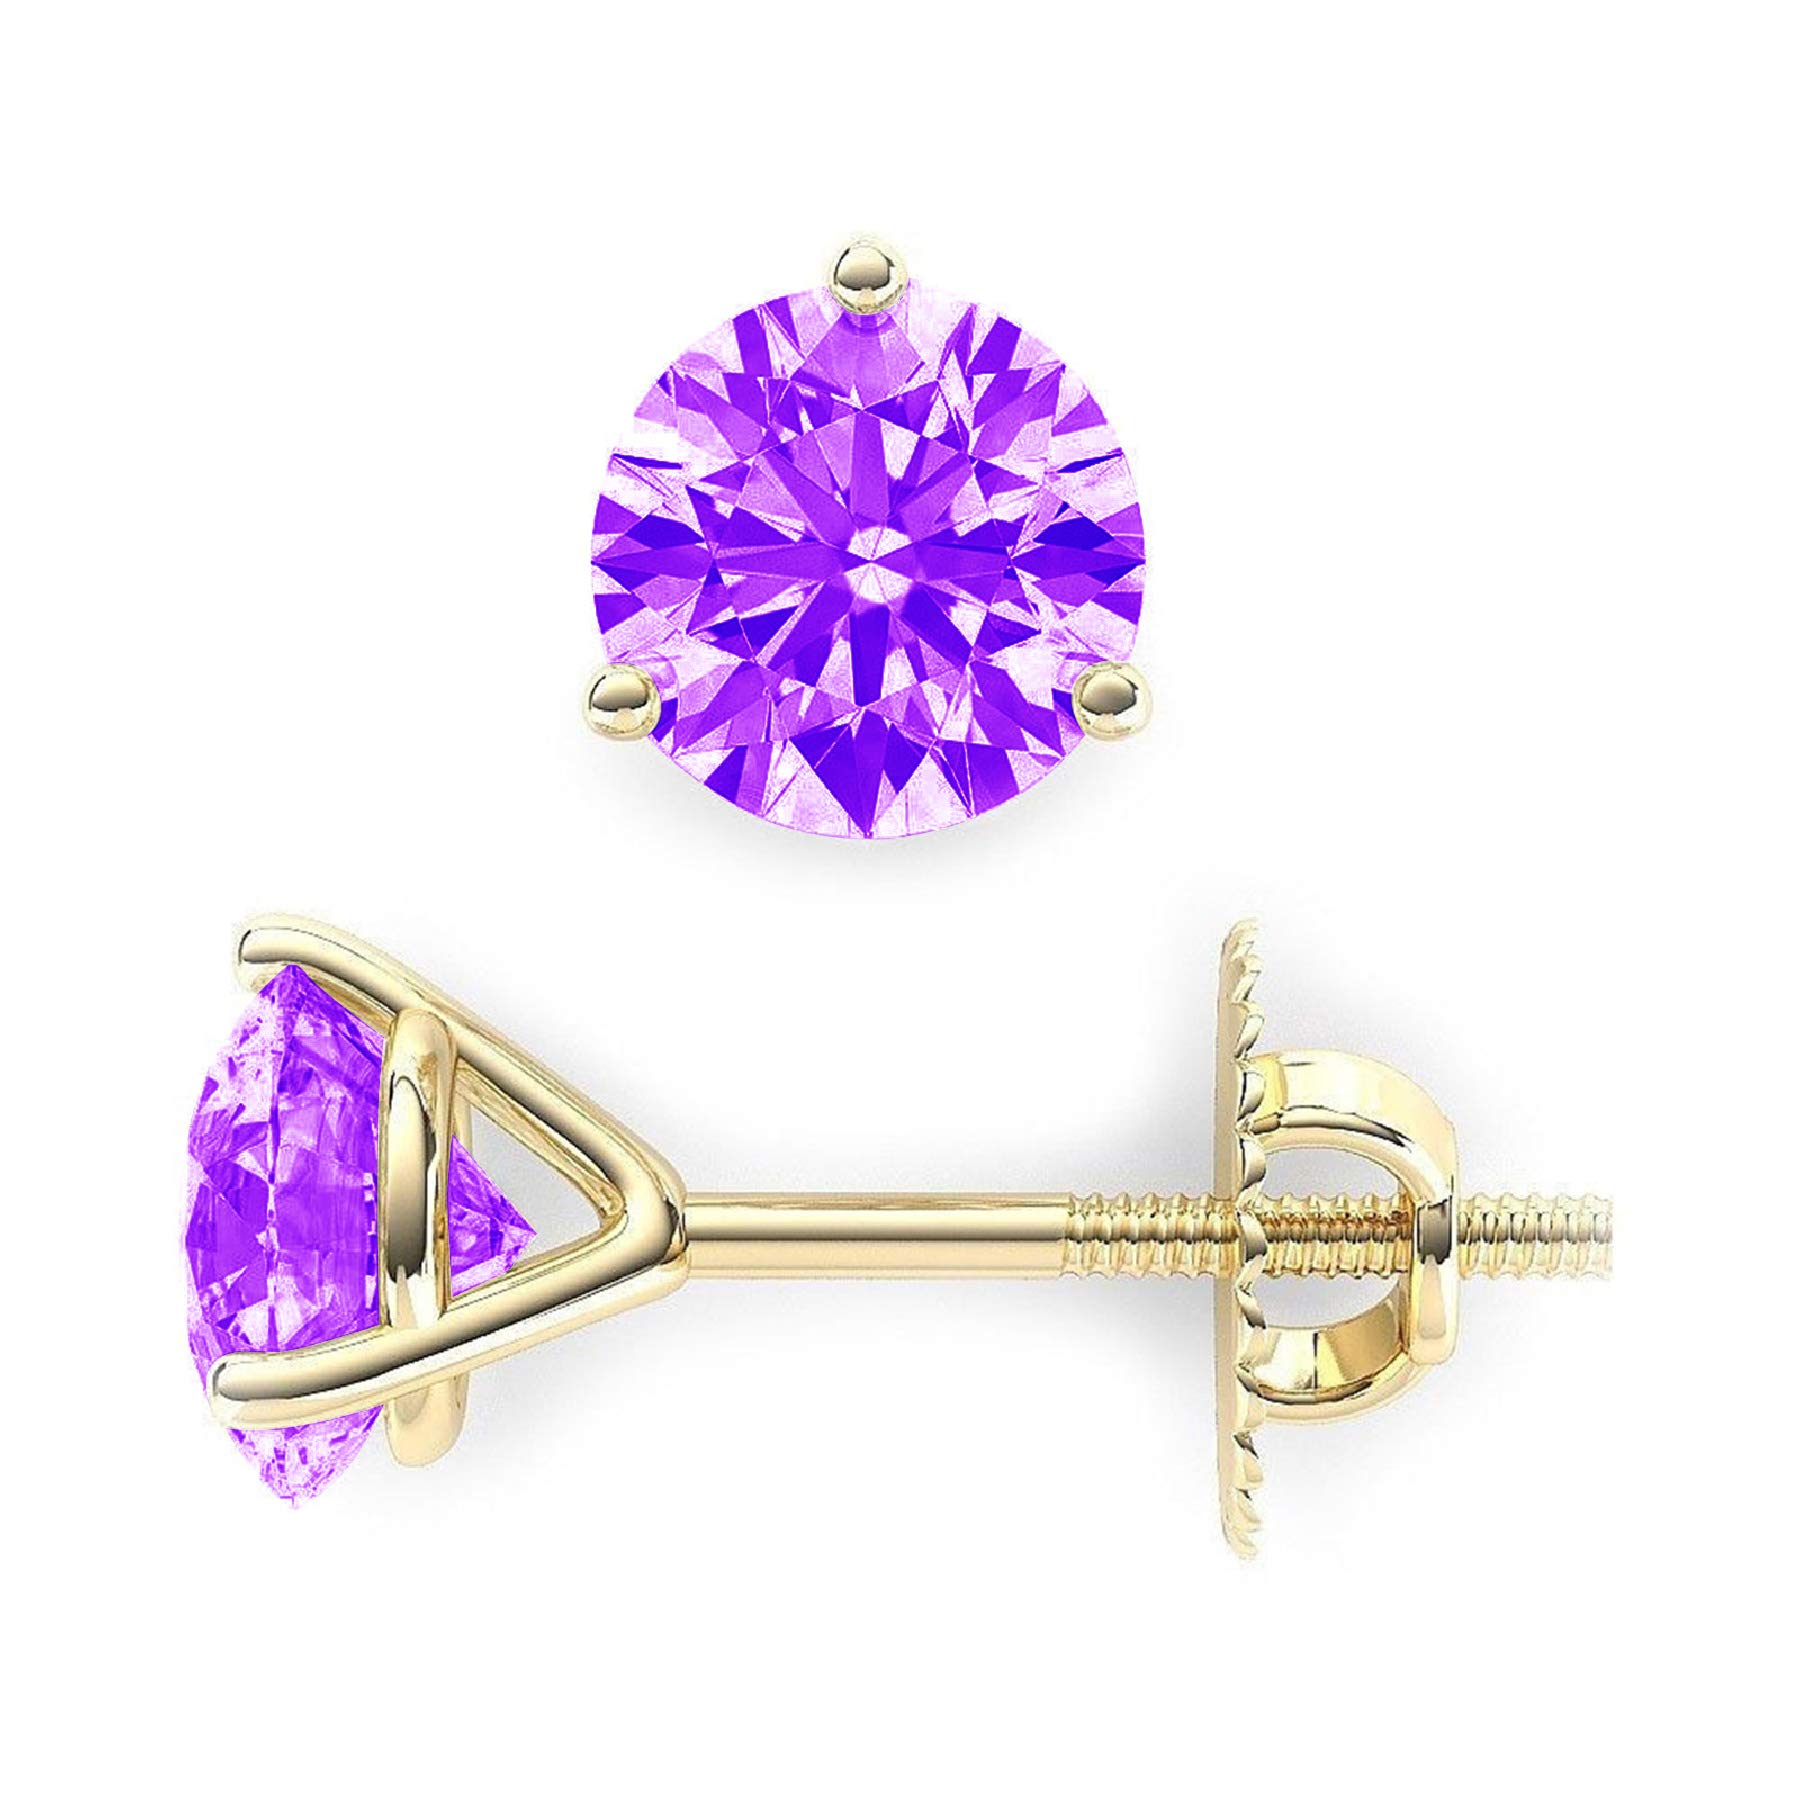 3.9ct Round Cut Solitaire Natural Purple Amethyst gemstone Unisex Designer 3 prong Stud Martini Earrings Solid 14k Yellow Gold Screw Back conflict free Jewelry